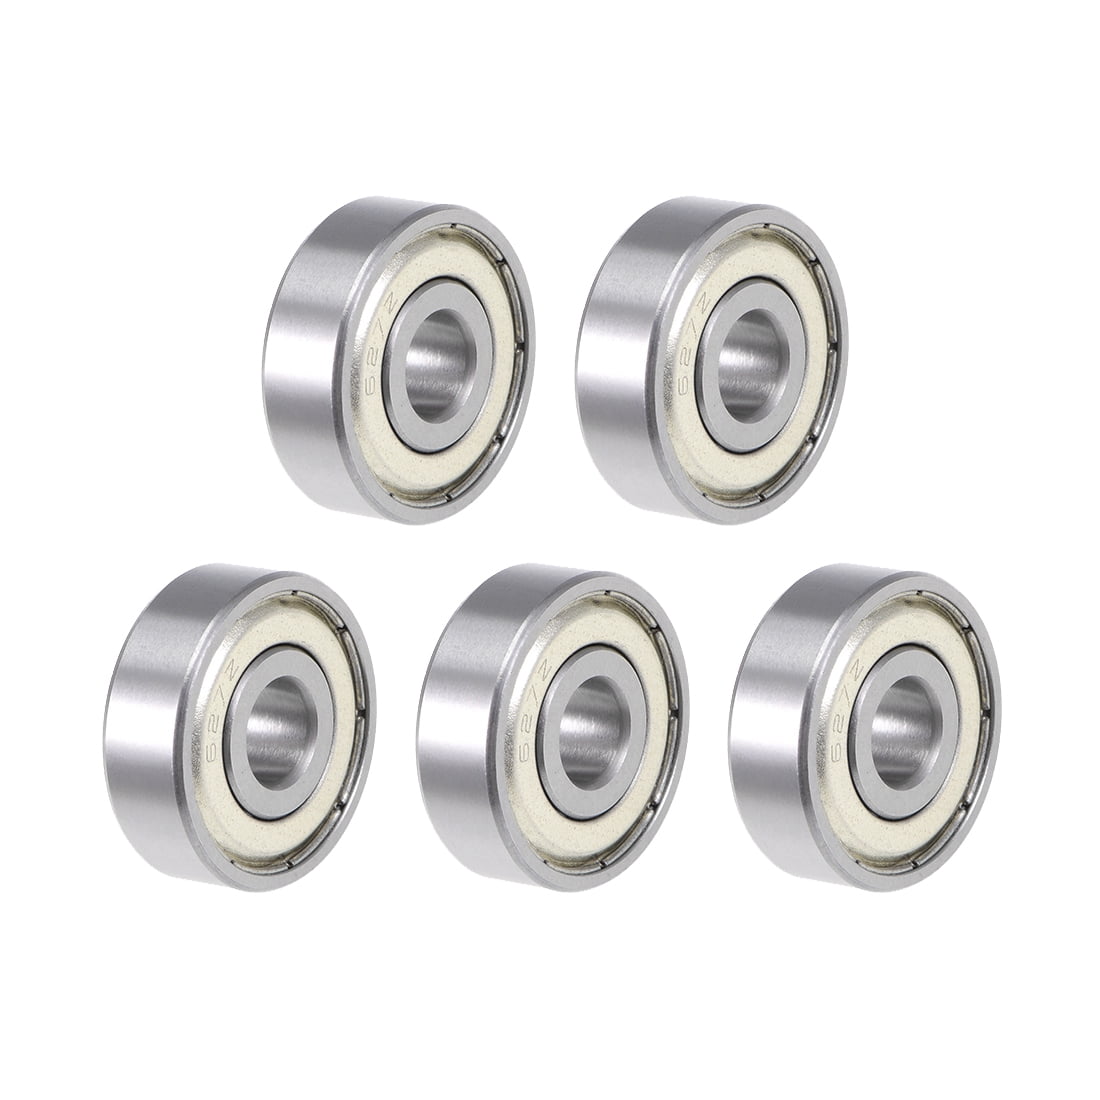 627ZZ Deep Groove Ball Bearings 7x22x7mm ABEC-3 Double Shield Bearings Pack of 5 